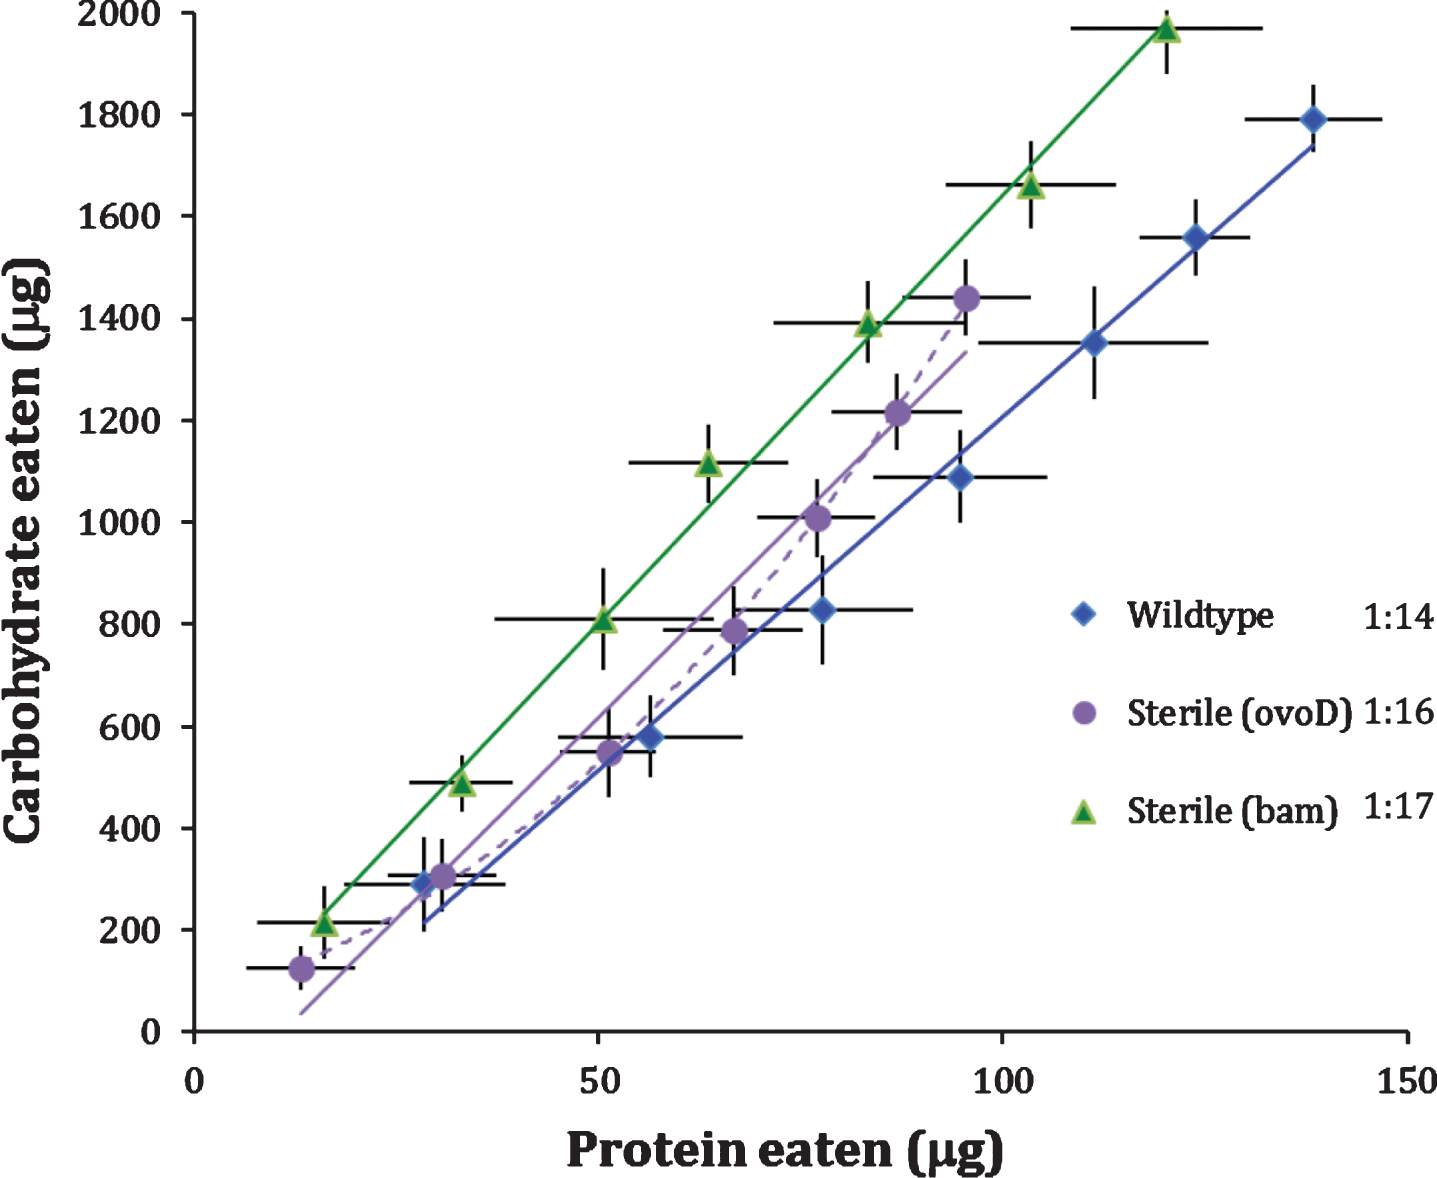 Wildtype (fertile) and sterile (OvoD, Bam) females. Mean cumulative protein and carbohydrate intake consumed by females with daily point estimate standard deviation, plotted across two weeks in CAFE assay. Cumulative intake trajectories with 2-day census intervals, and best-fit linear (solid line) or quadratic (dash line) functions. P:C ratios at legend were estimated from linear regression.